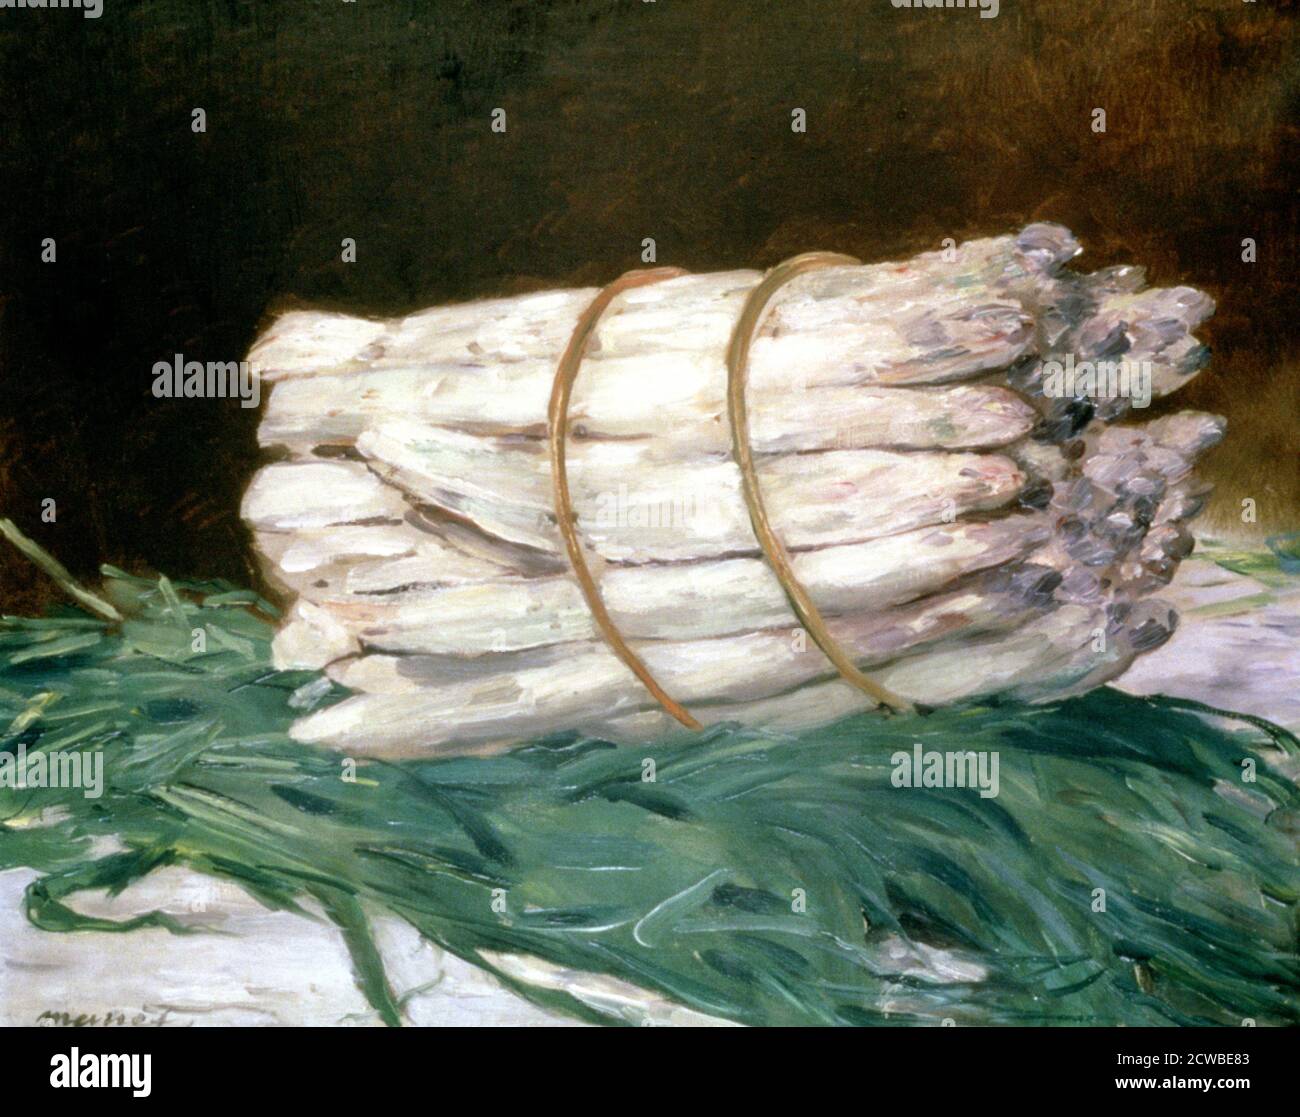 Bundle of Asparagus', 1880. Artist: Edouard Manet. Edouard Manet(1832-1883) was a French modernist painter. He was one of the first 19th-century artists to paint modern life. Stock Photo